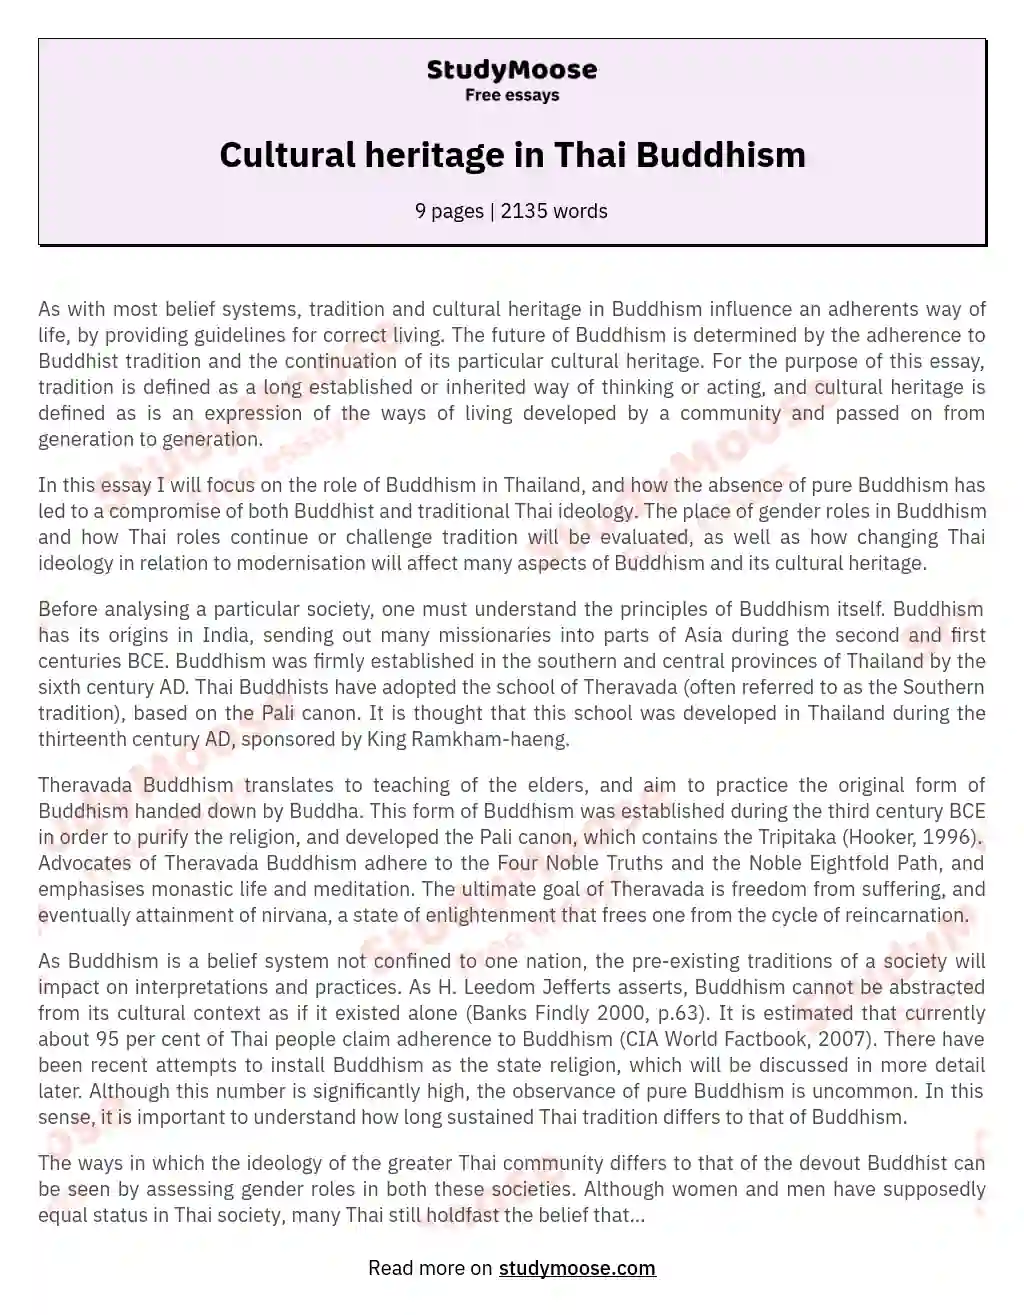 Cultural heritage in Thai Buddhism essay